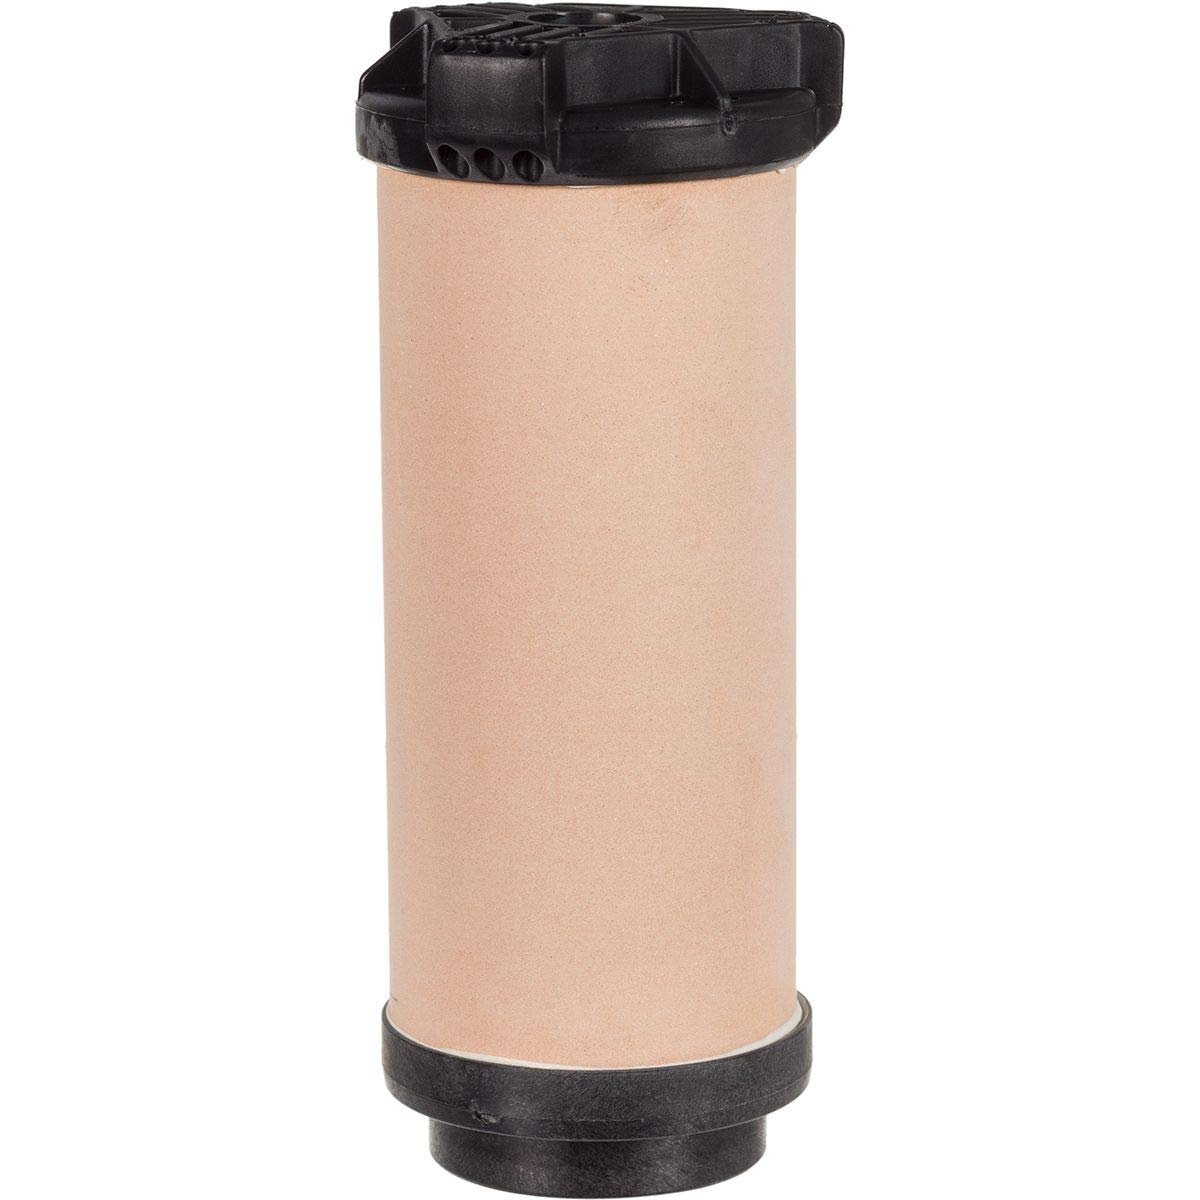 1 MiniWorks EX Backcountry Water Filter by MSR